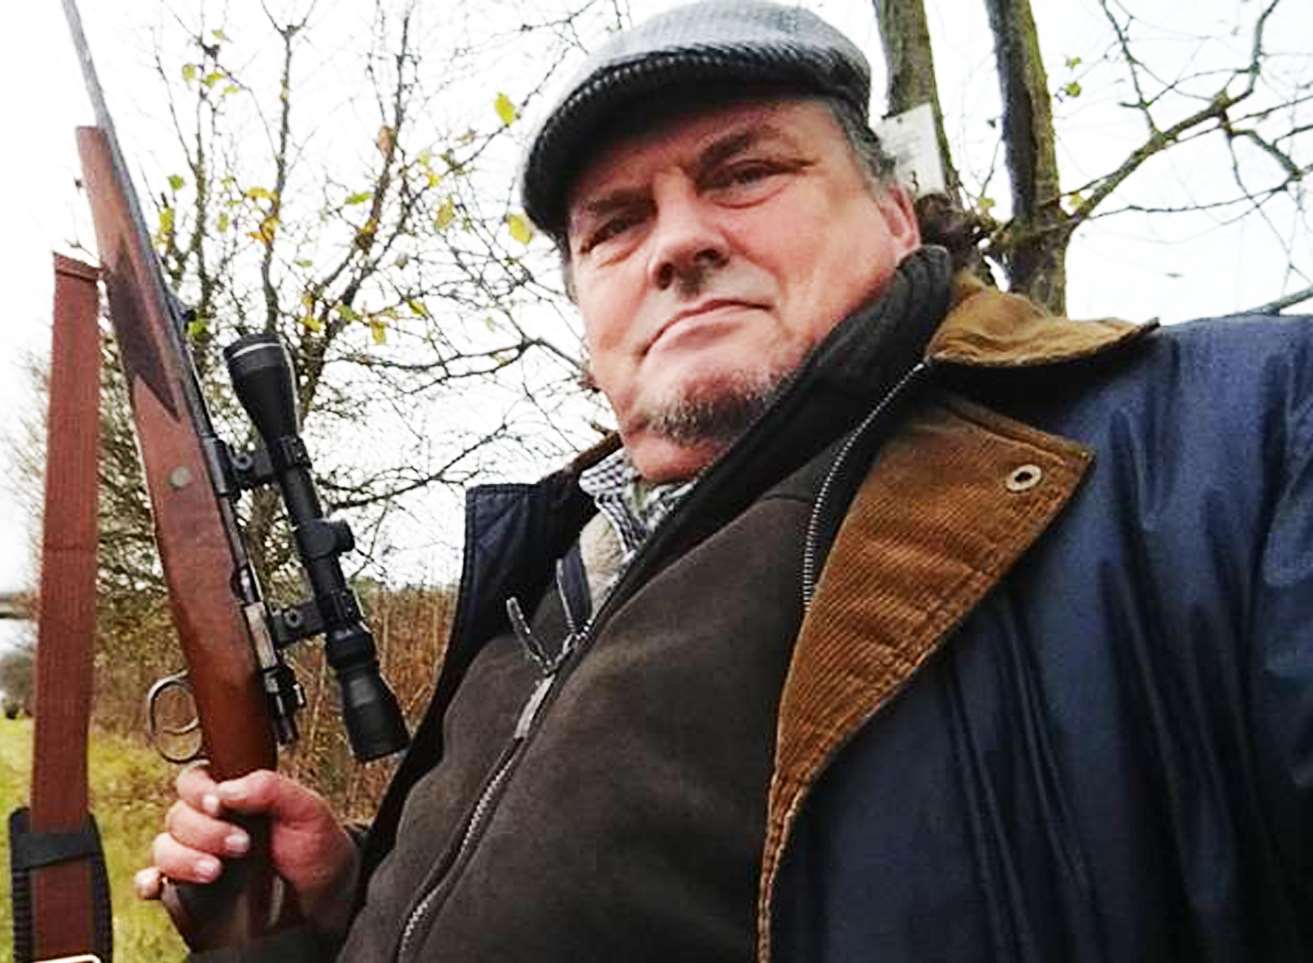 The Bishop regularly shoots boar in his native Belgium. Photo Mike Gunnill